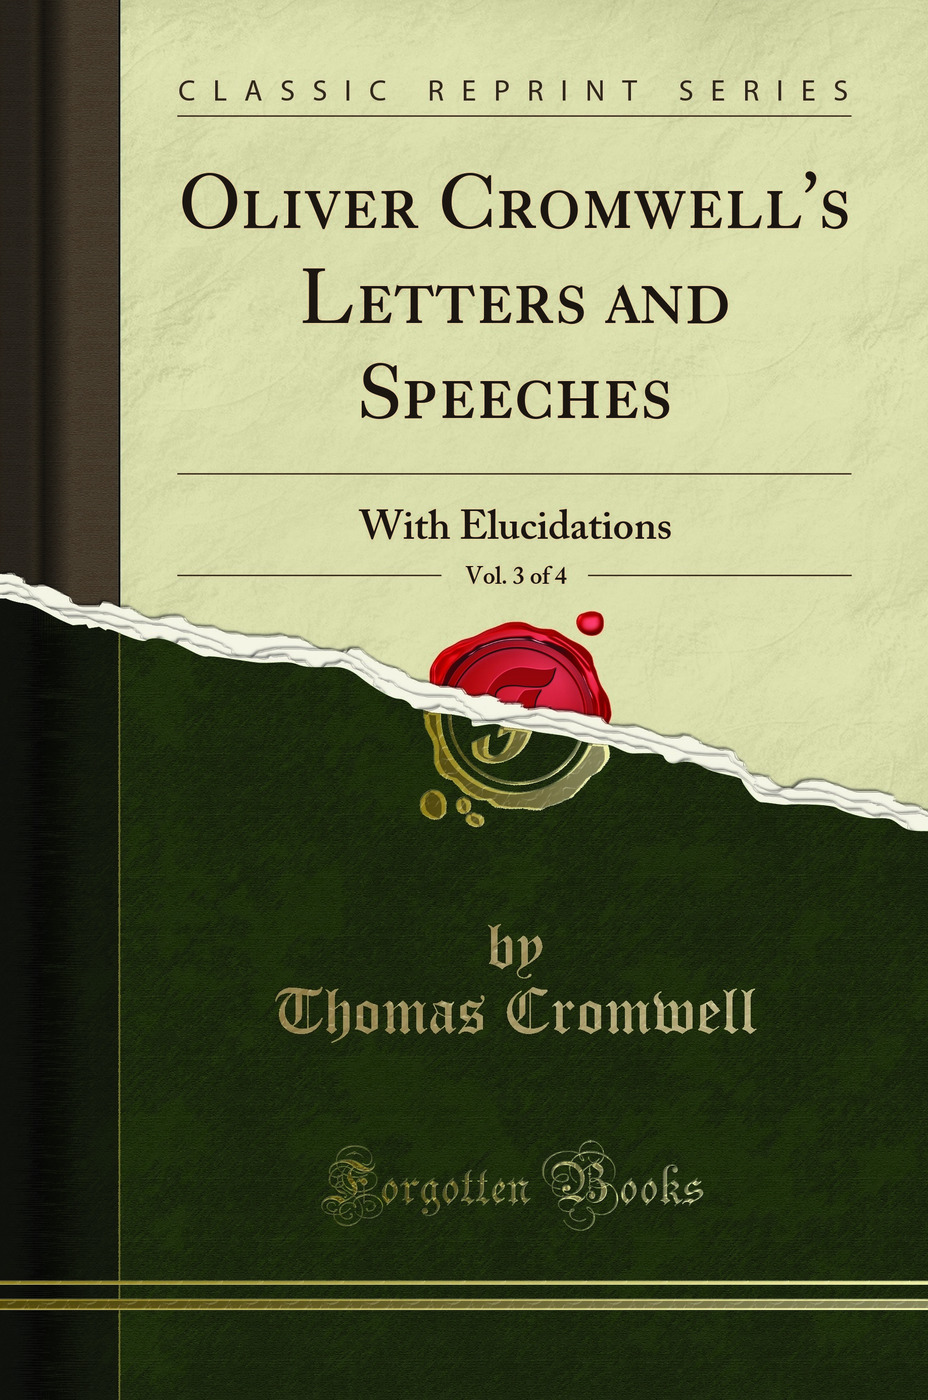 Oliver Cromwell's Letters and Speeches, Vol. 3 of 4: With Elucidations - Thomas Cromwell